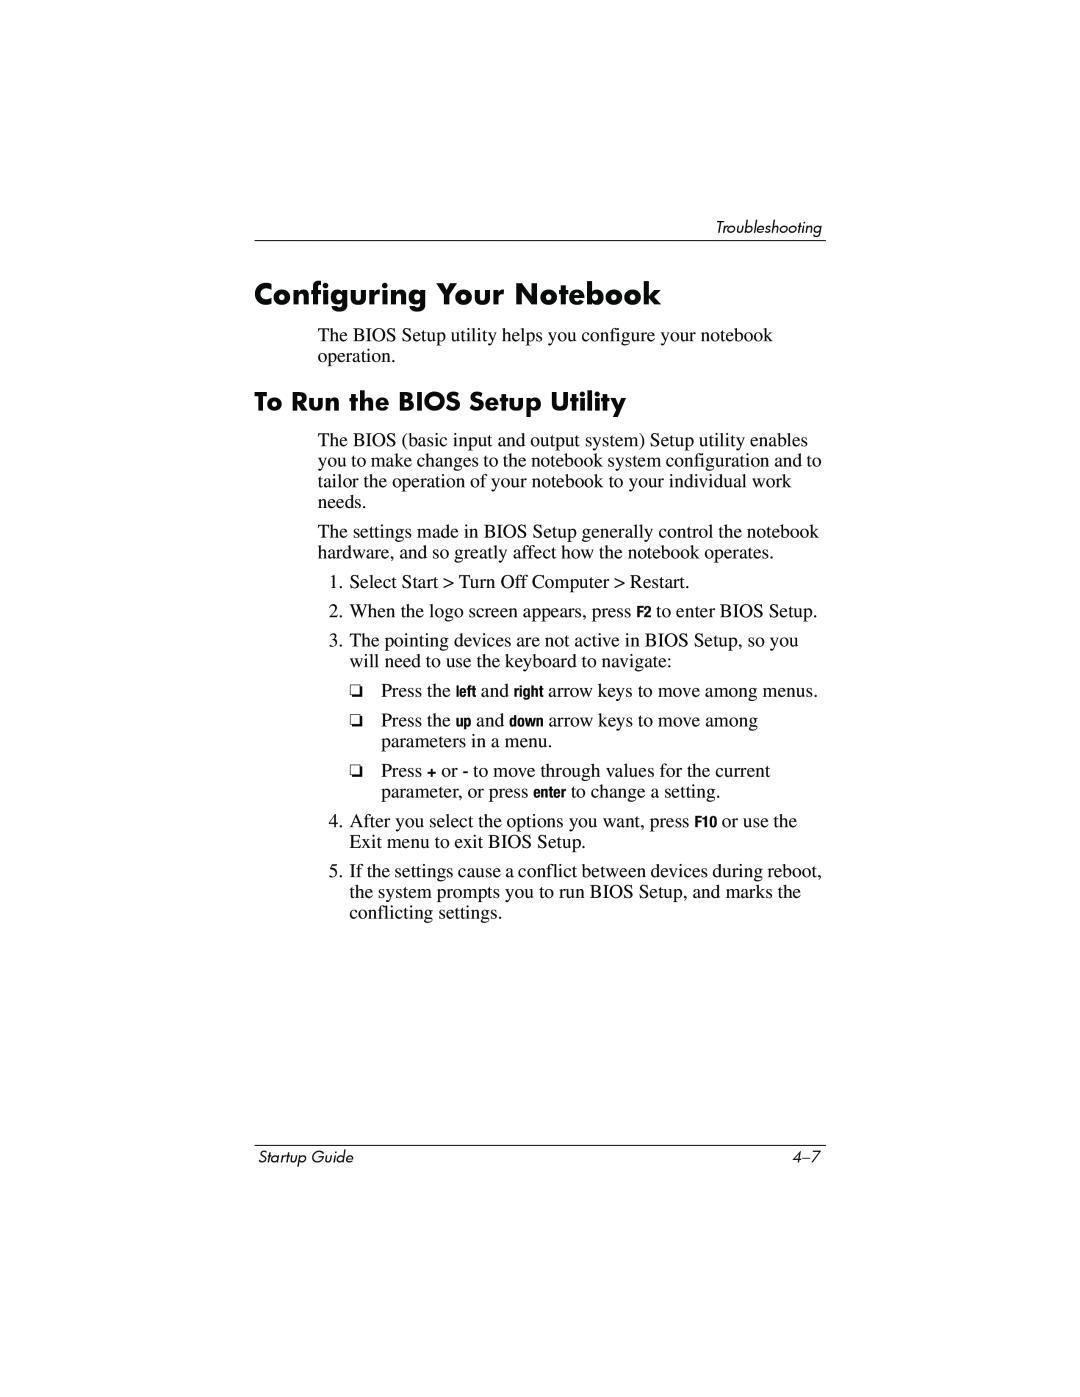 Compaq Personal Computer manual Configuring Your Notebook, To Run the BIOS Setup Utility 